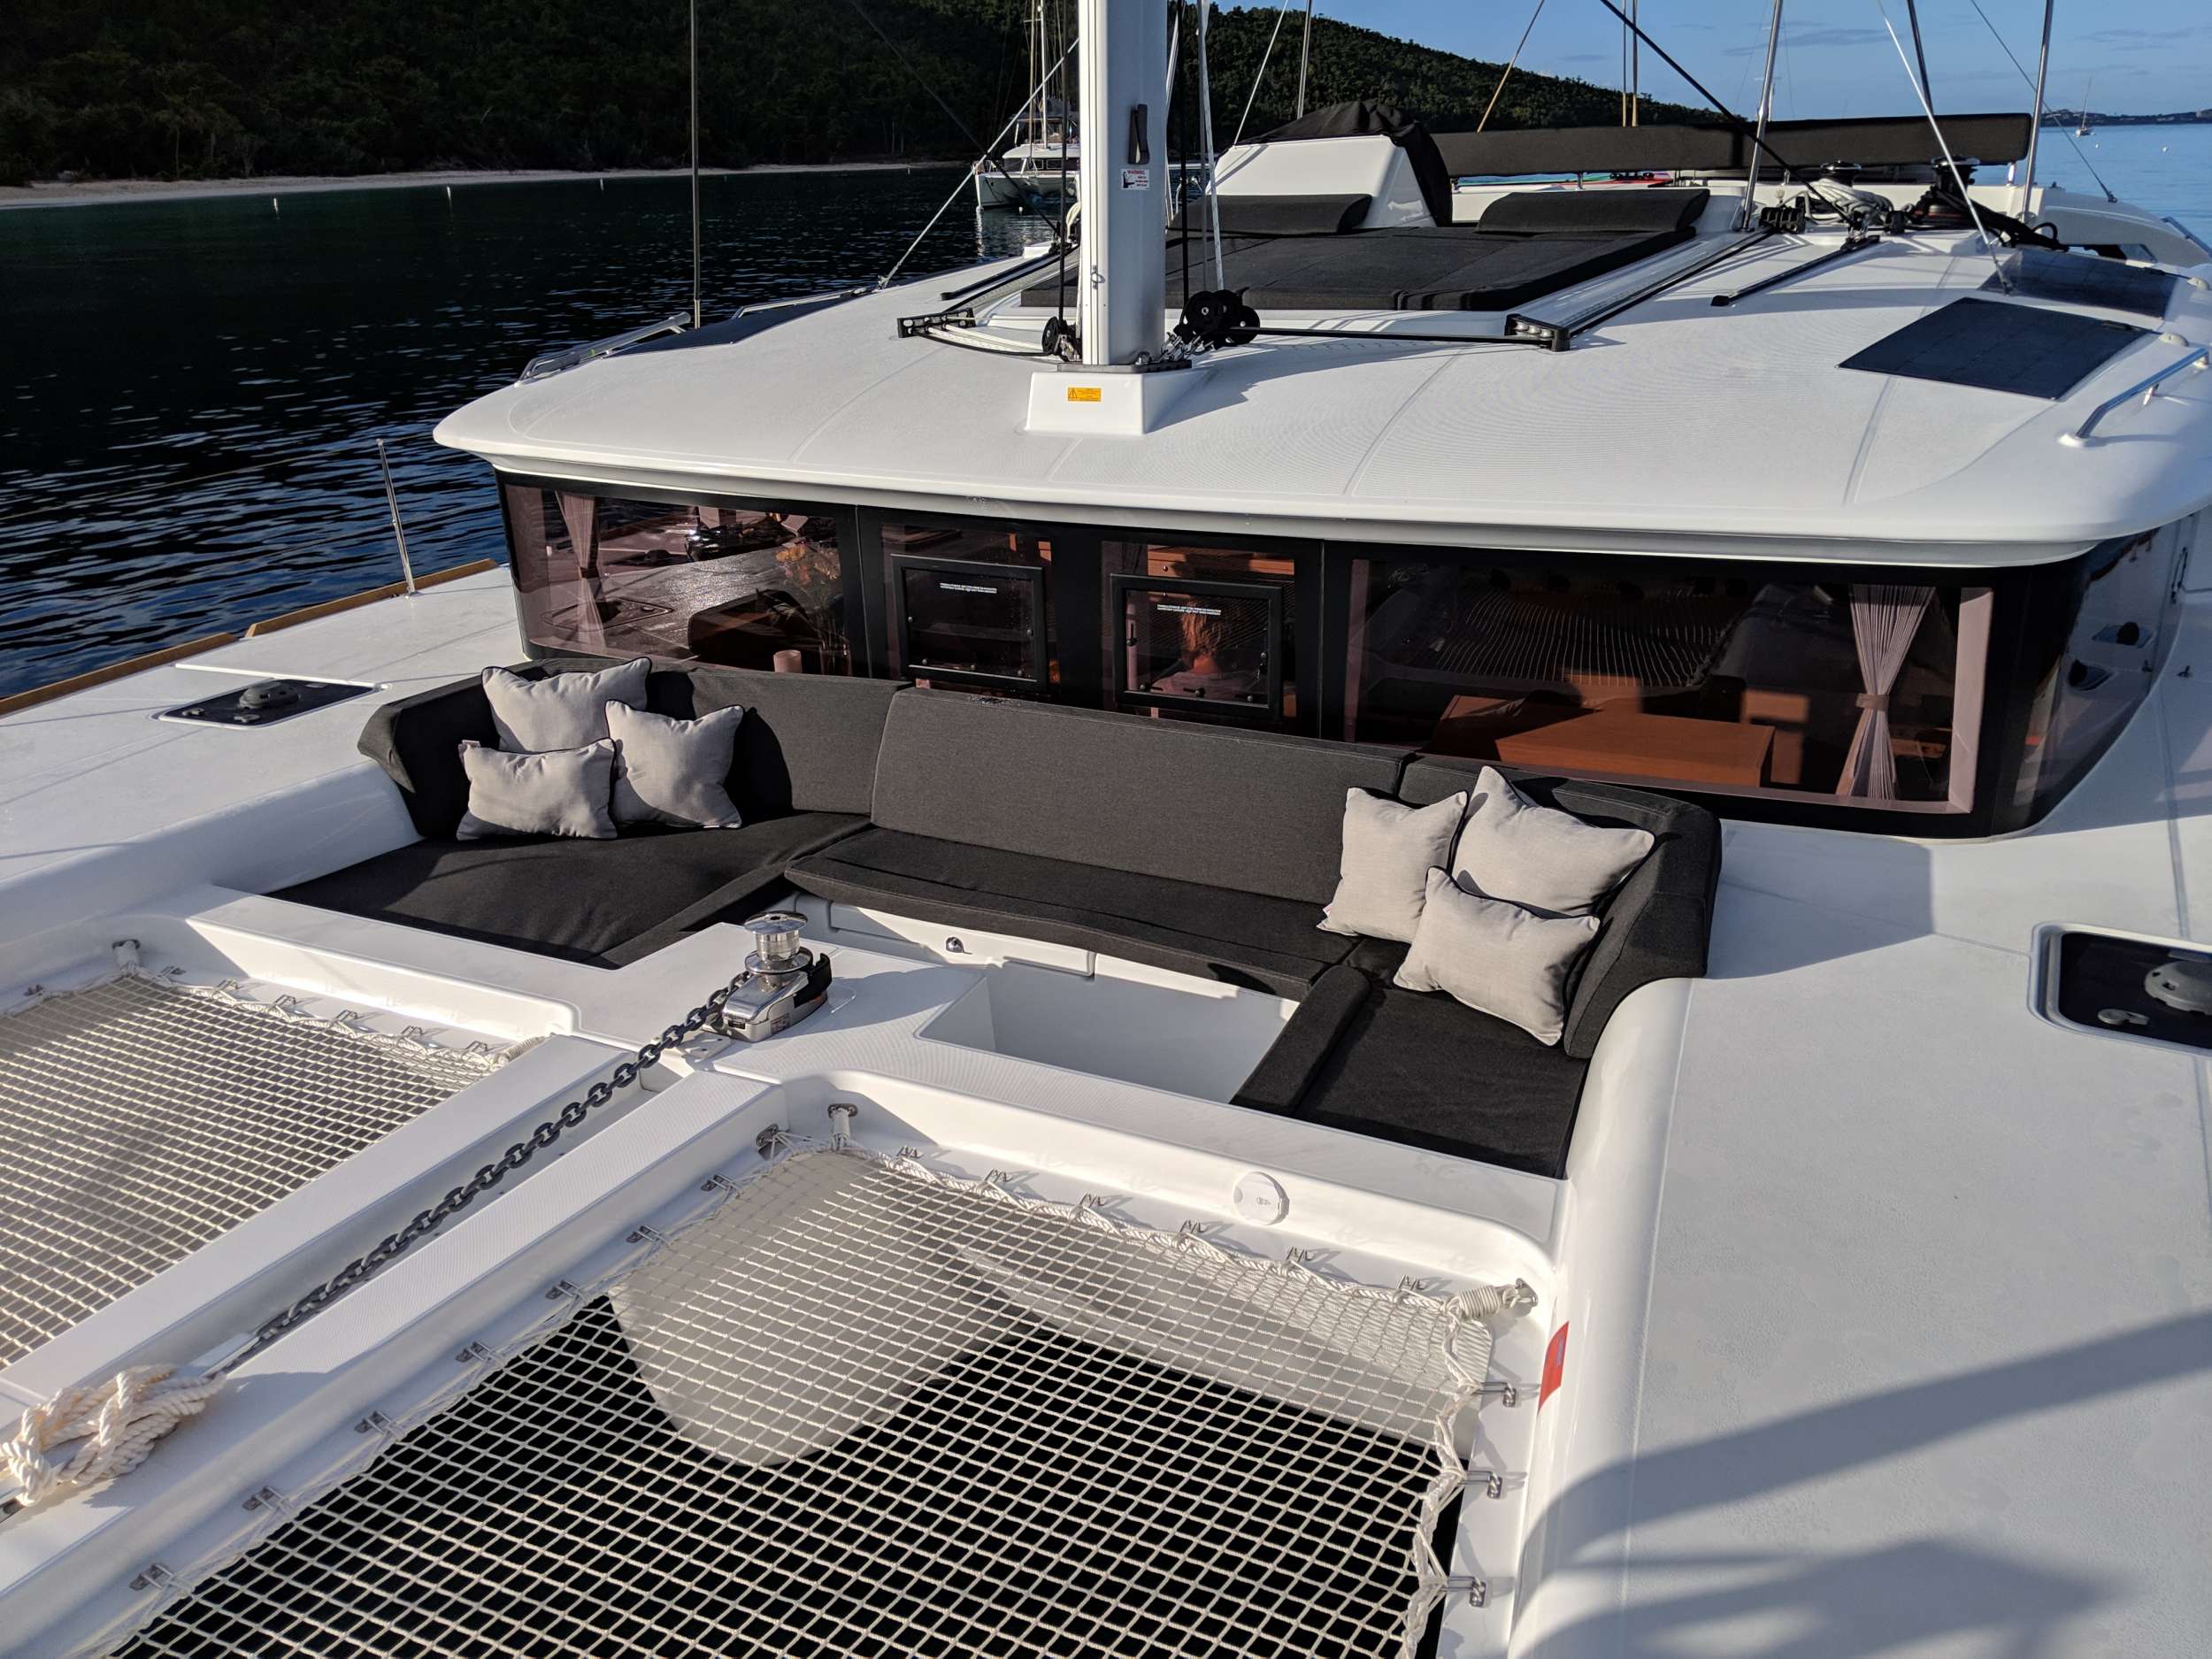 FLOATATION THERAPY Yacht Charter - additional forward seating